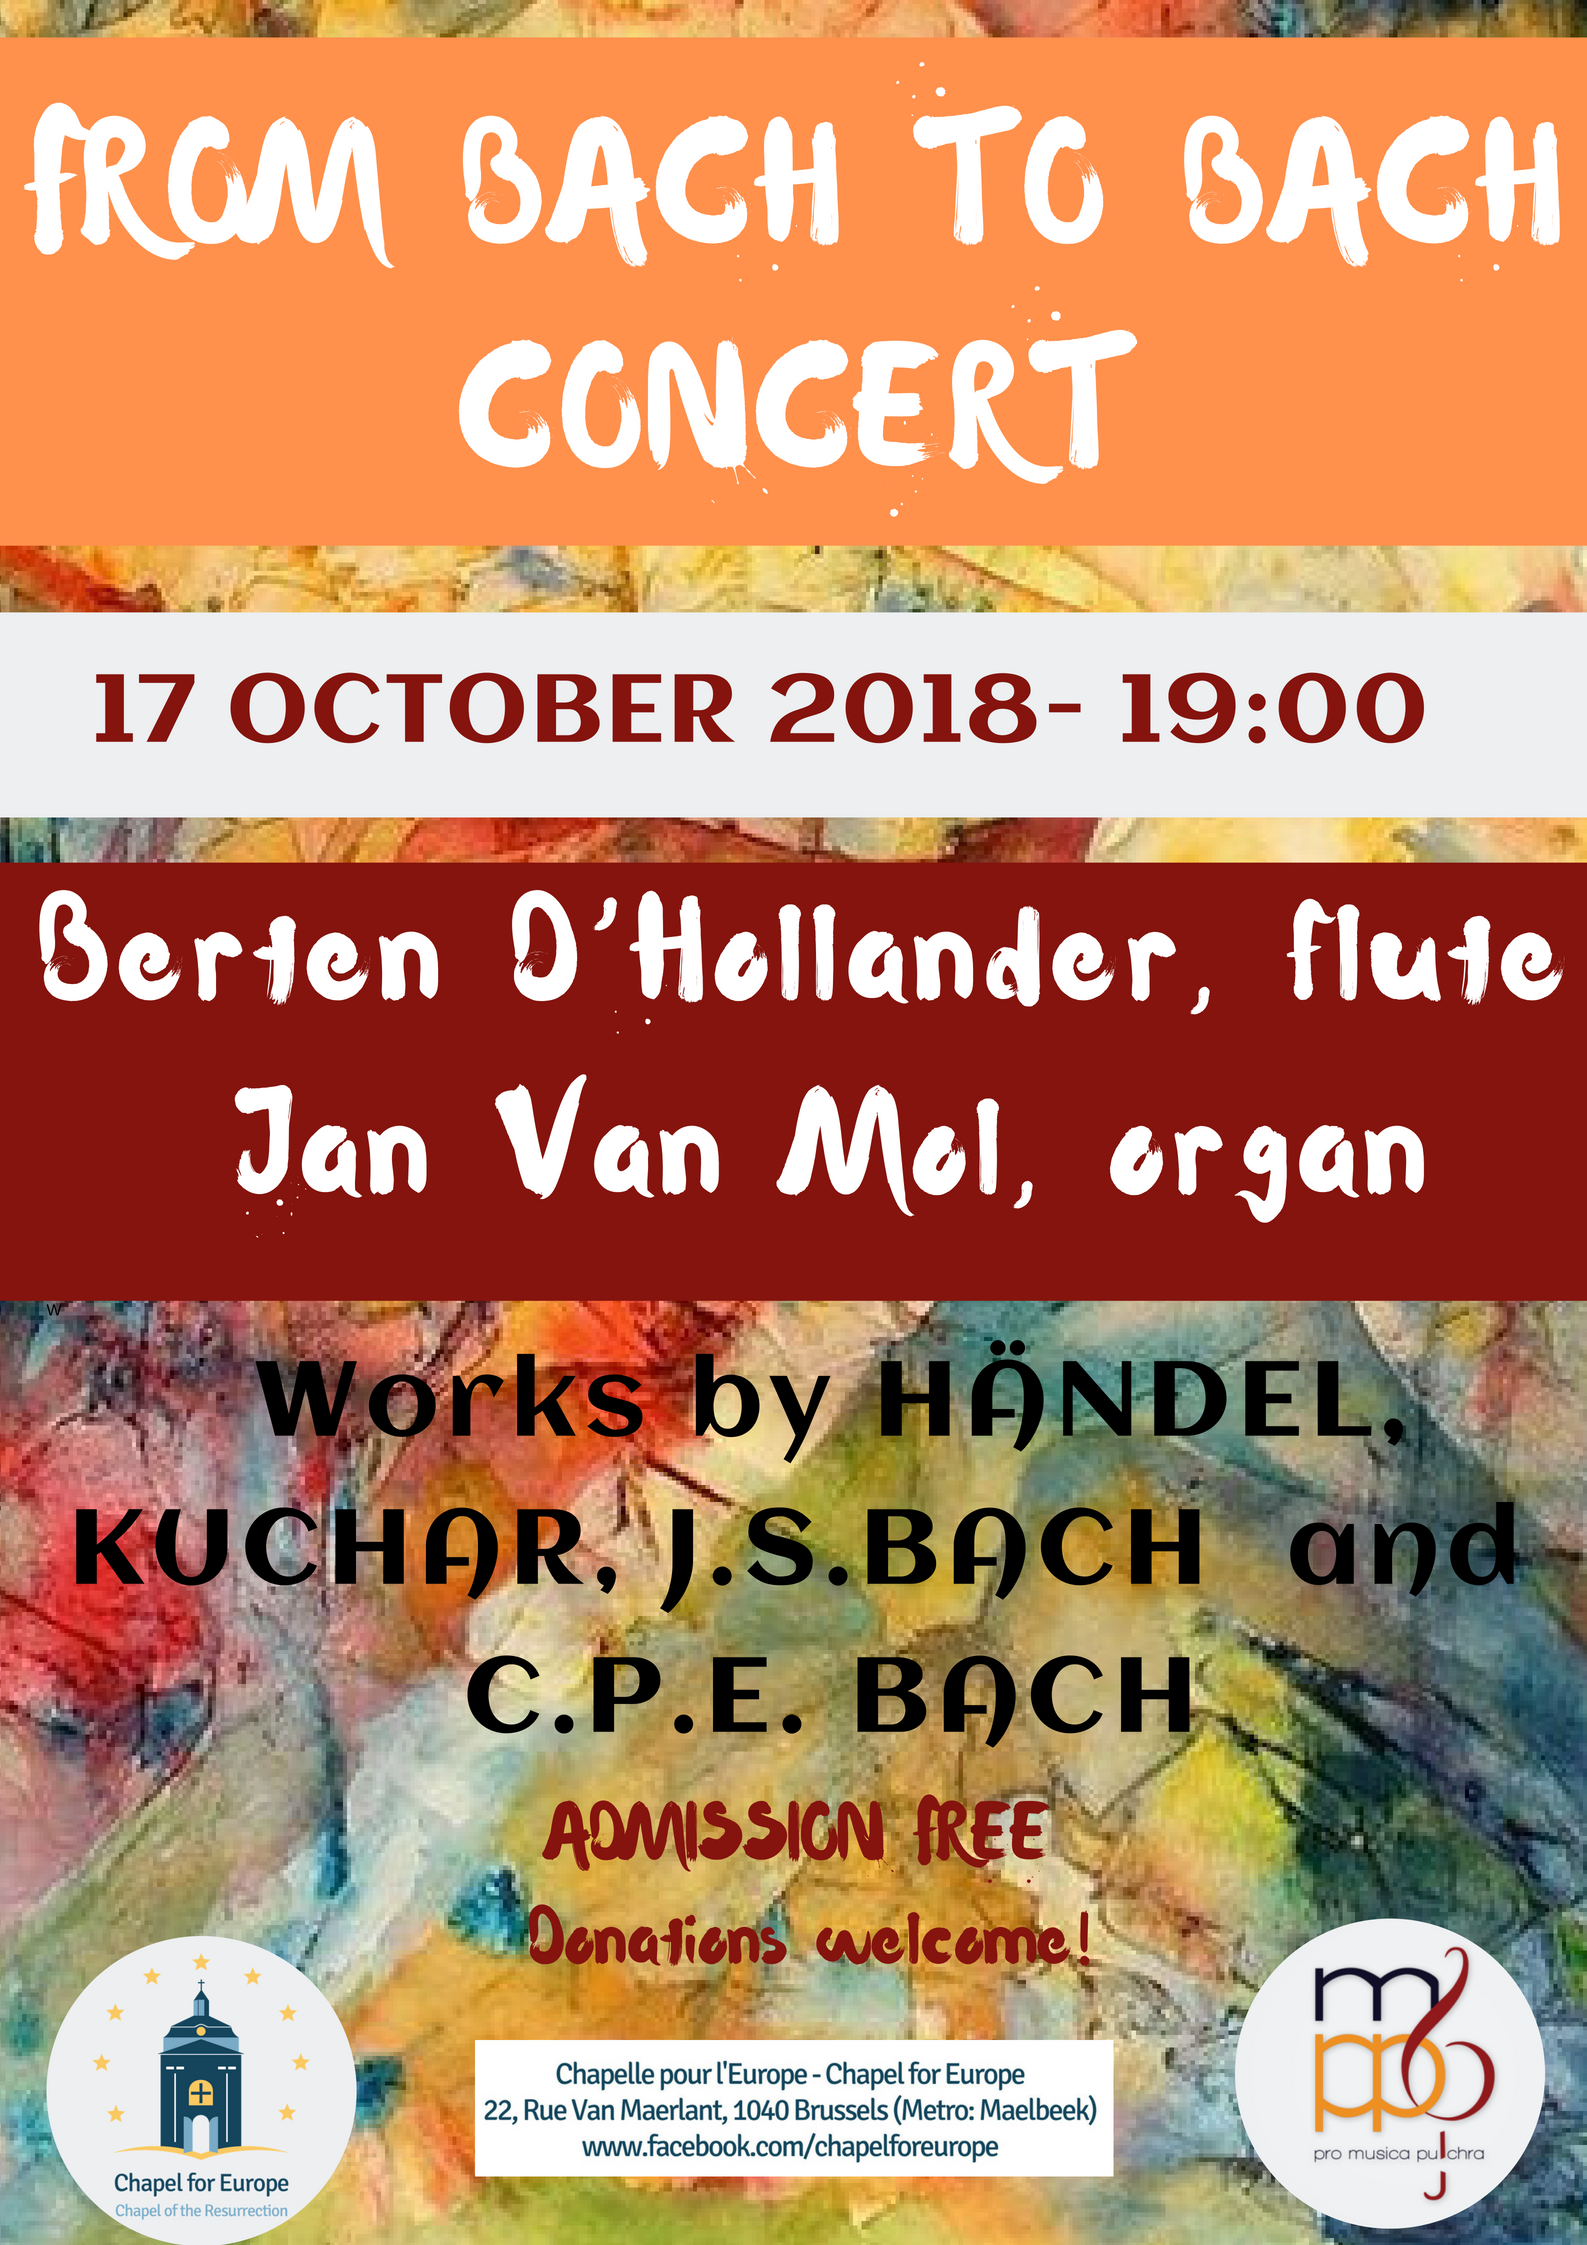 From Bach to Bach Concert 17.10.2018 2